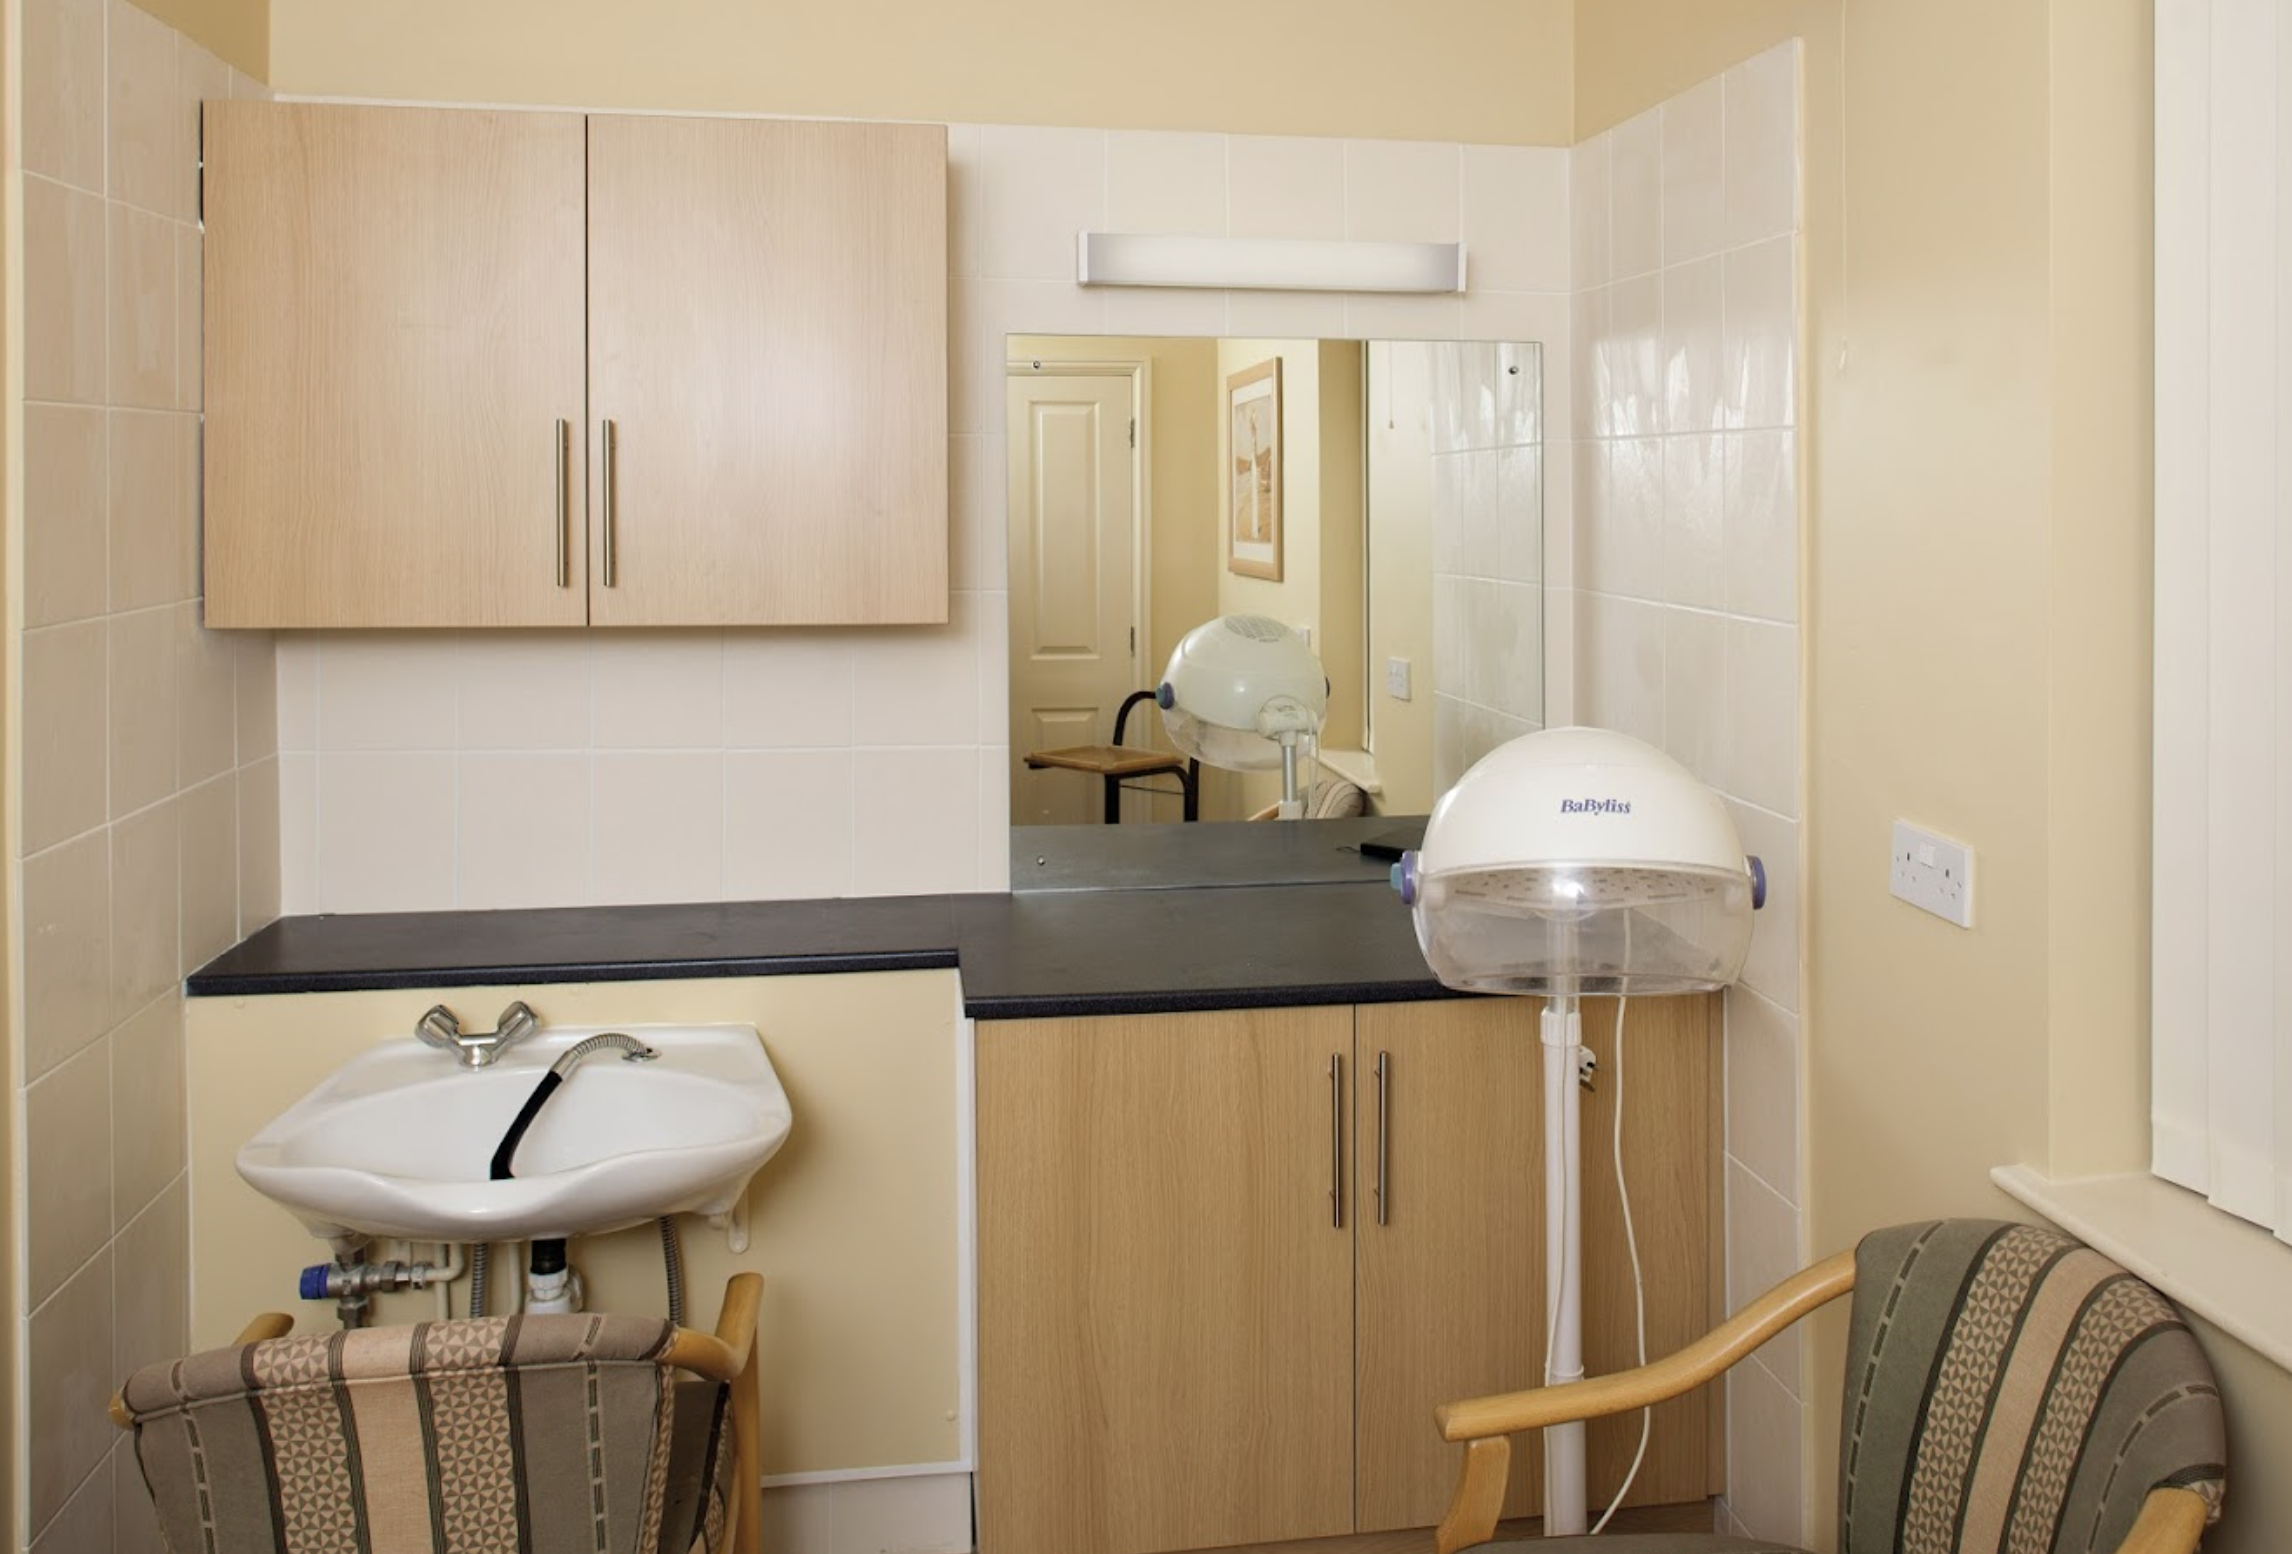 Salon of The Priory care home in Solihull, West Midlands